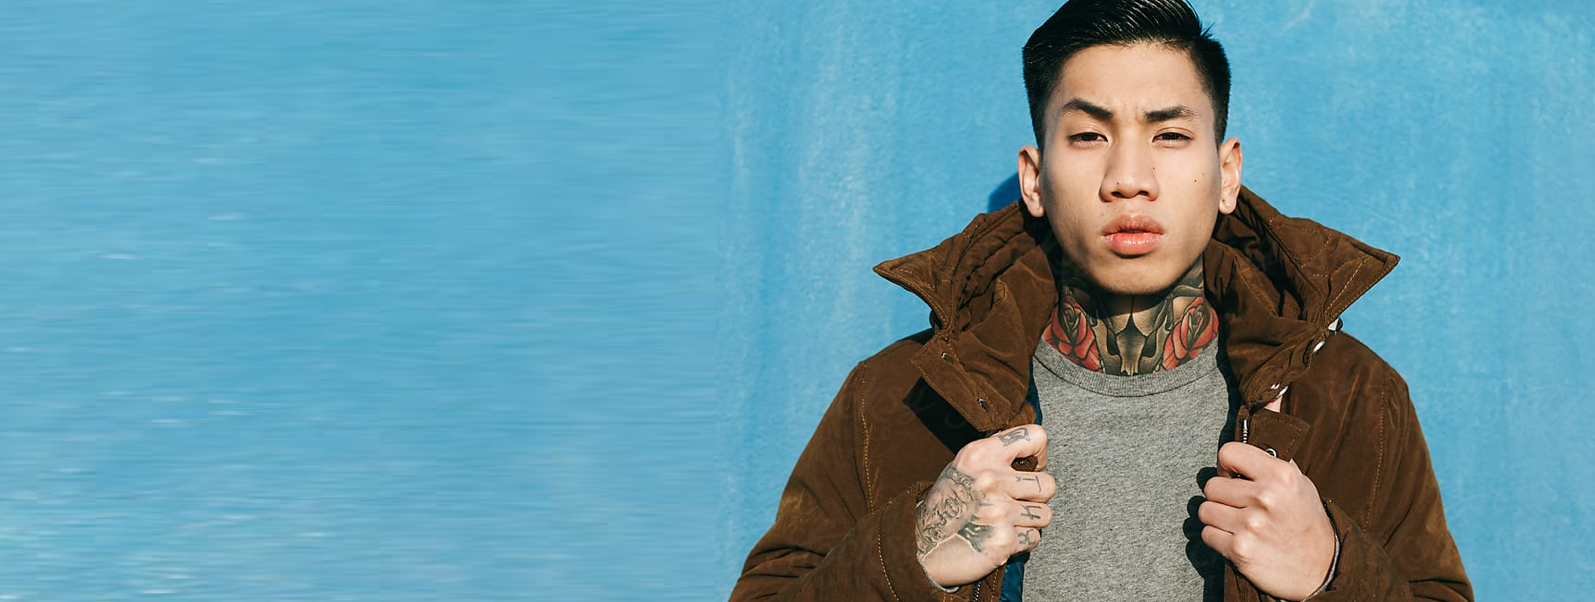 An asian man wearing a brown coat stands in front of a blue wall with tattoos on his hand and neck.